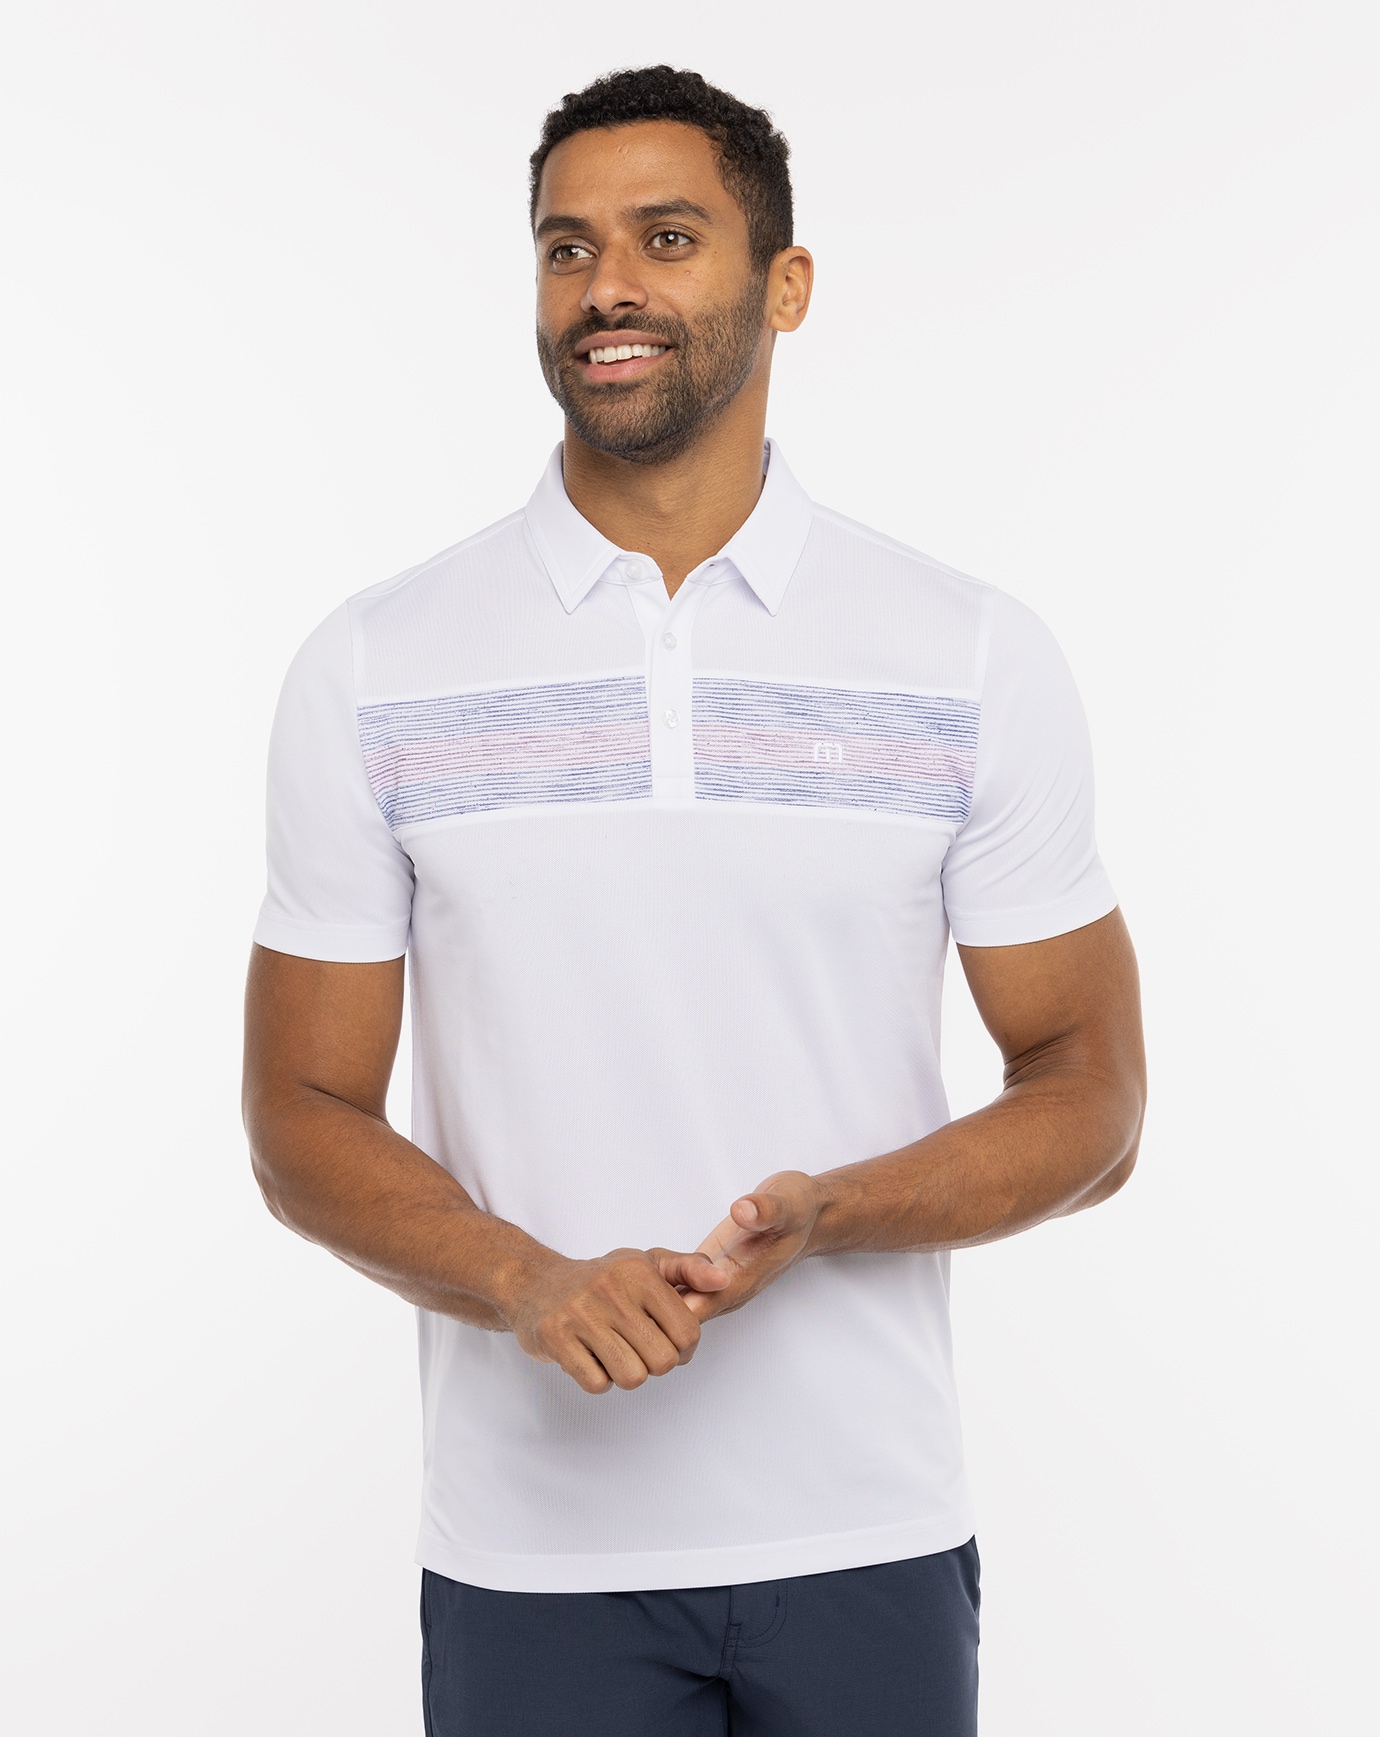 Related Product - IN A MEETING POLO